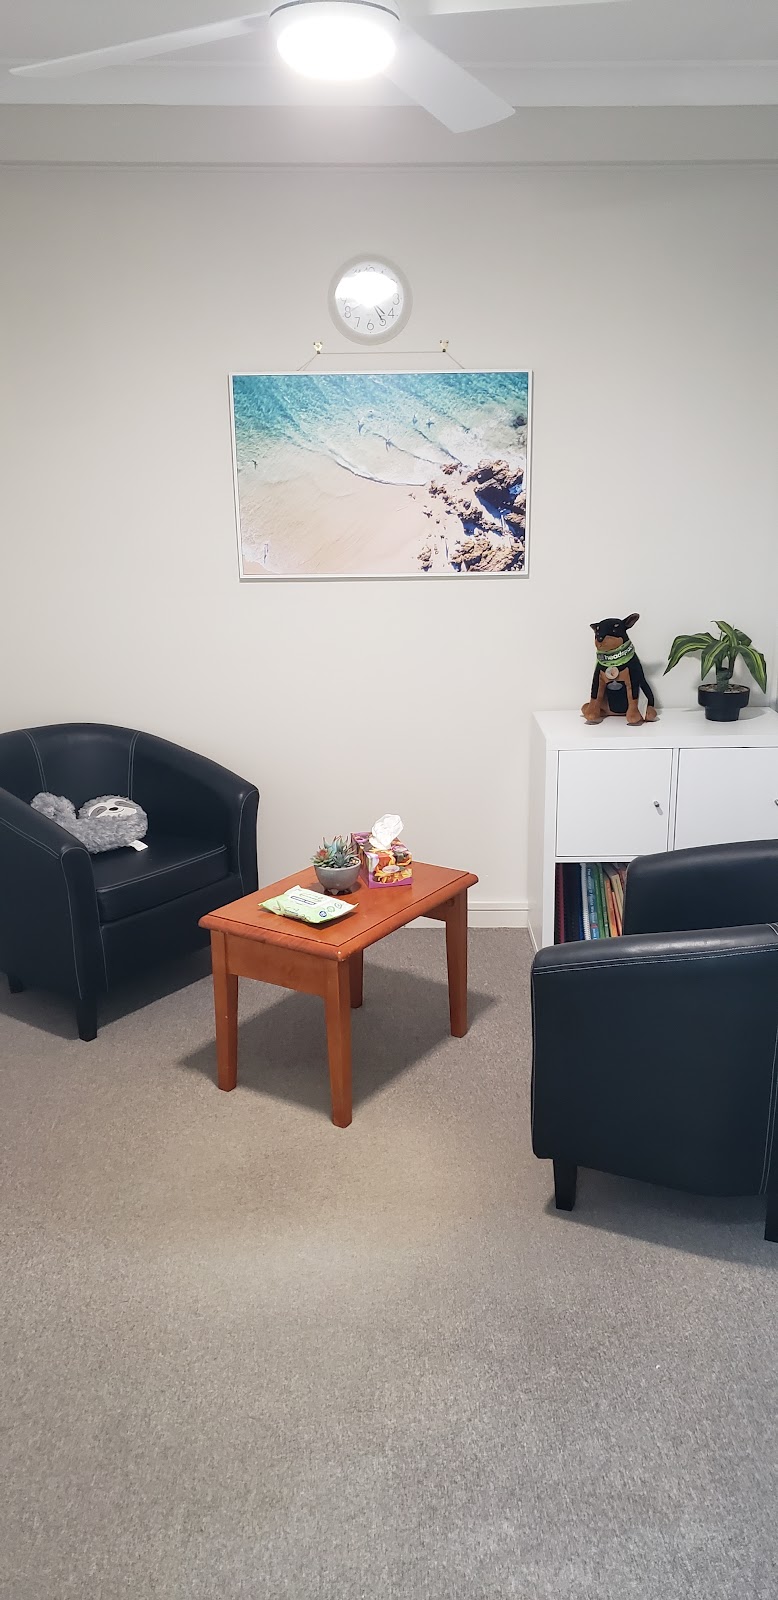 BetterSpace Wellbeing Clinic | 108 Taylor St, Armidale NSW 2350, Australia | Phone: (02) 5713 0333